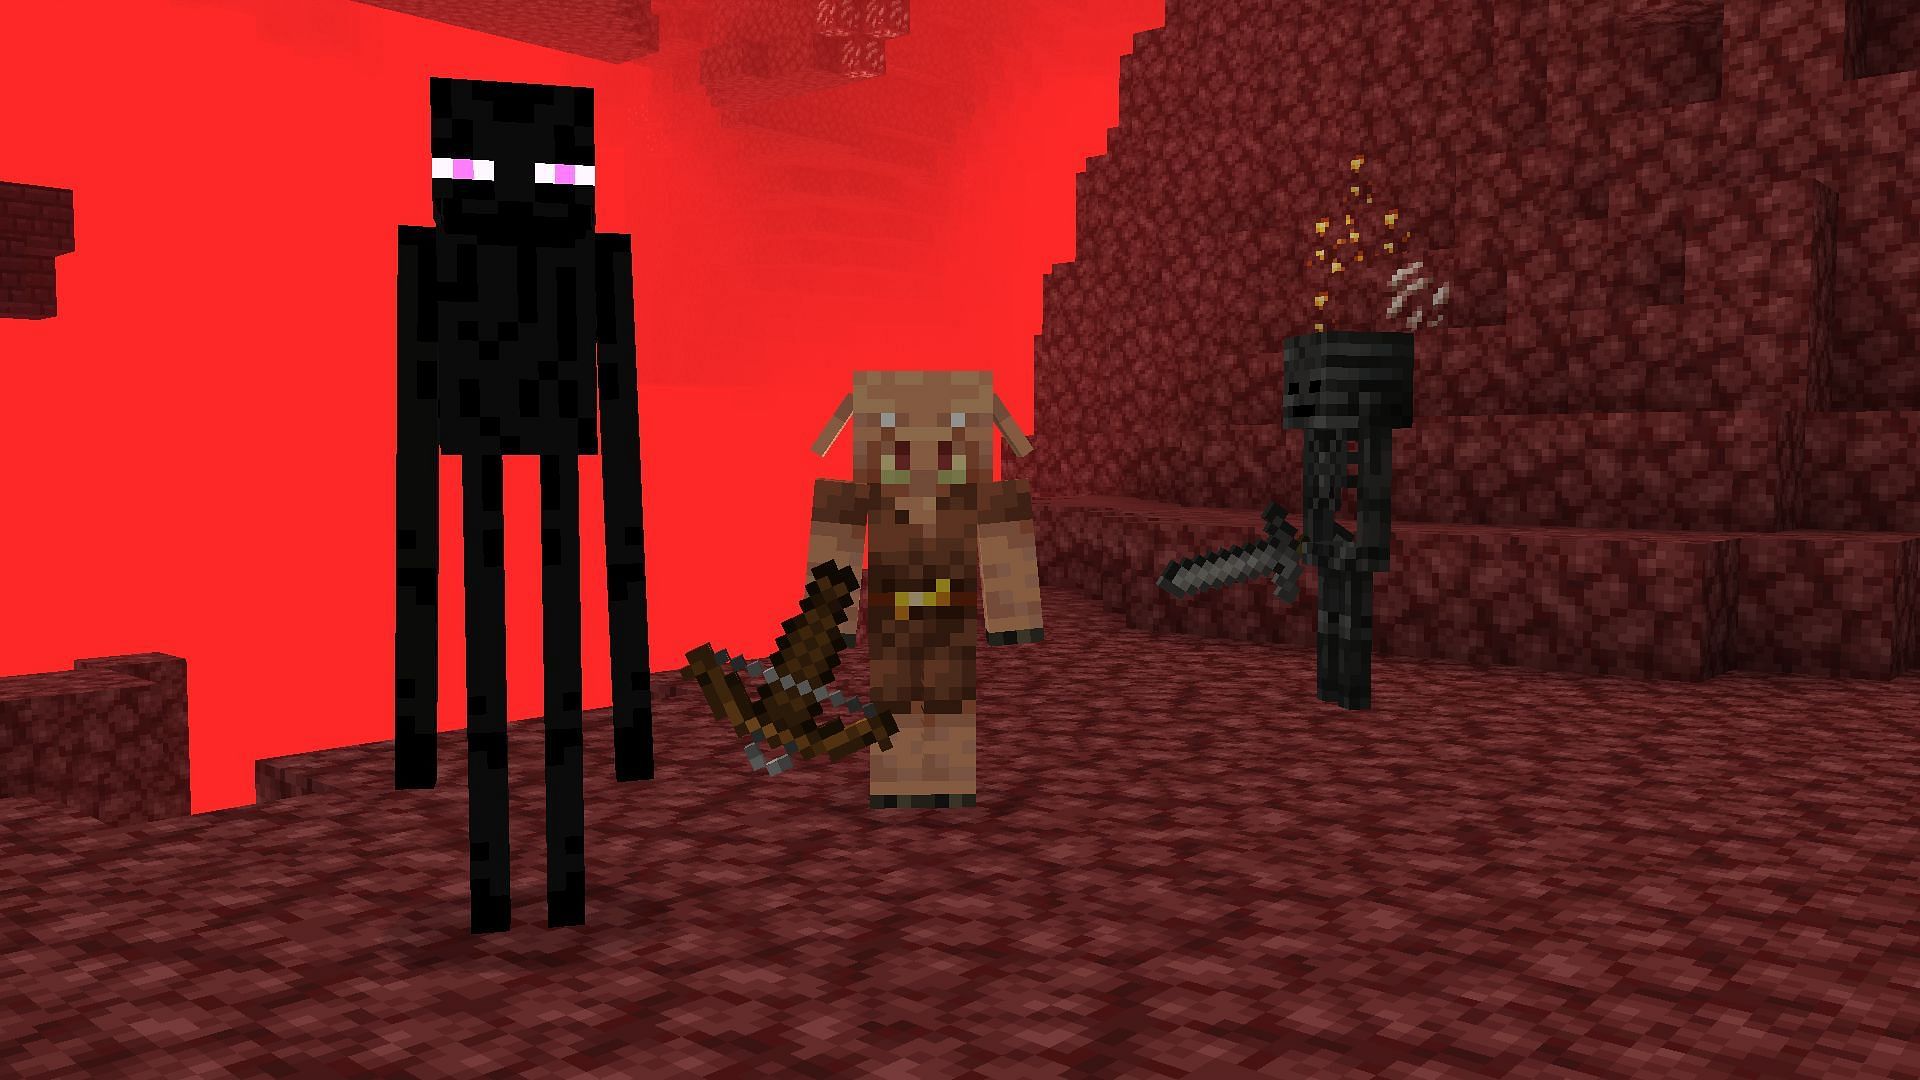 Hostile mobs can be farmed to get the most XP points in Minecraft 1.19 (Image via Mojang)